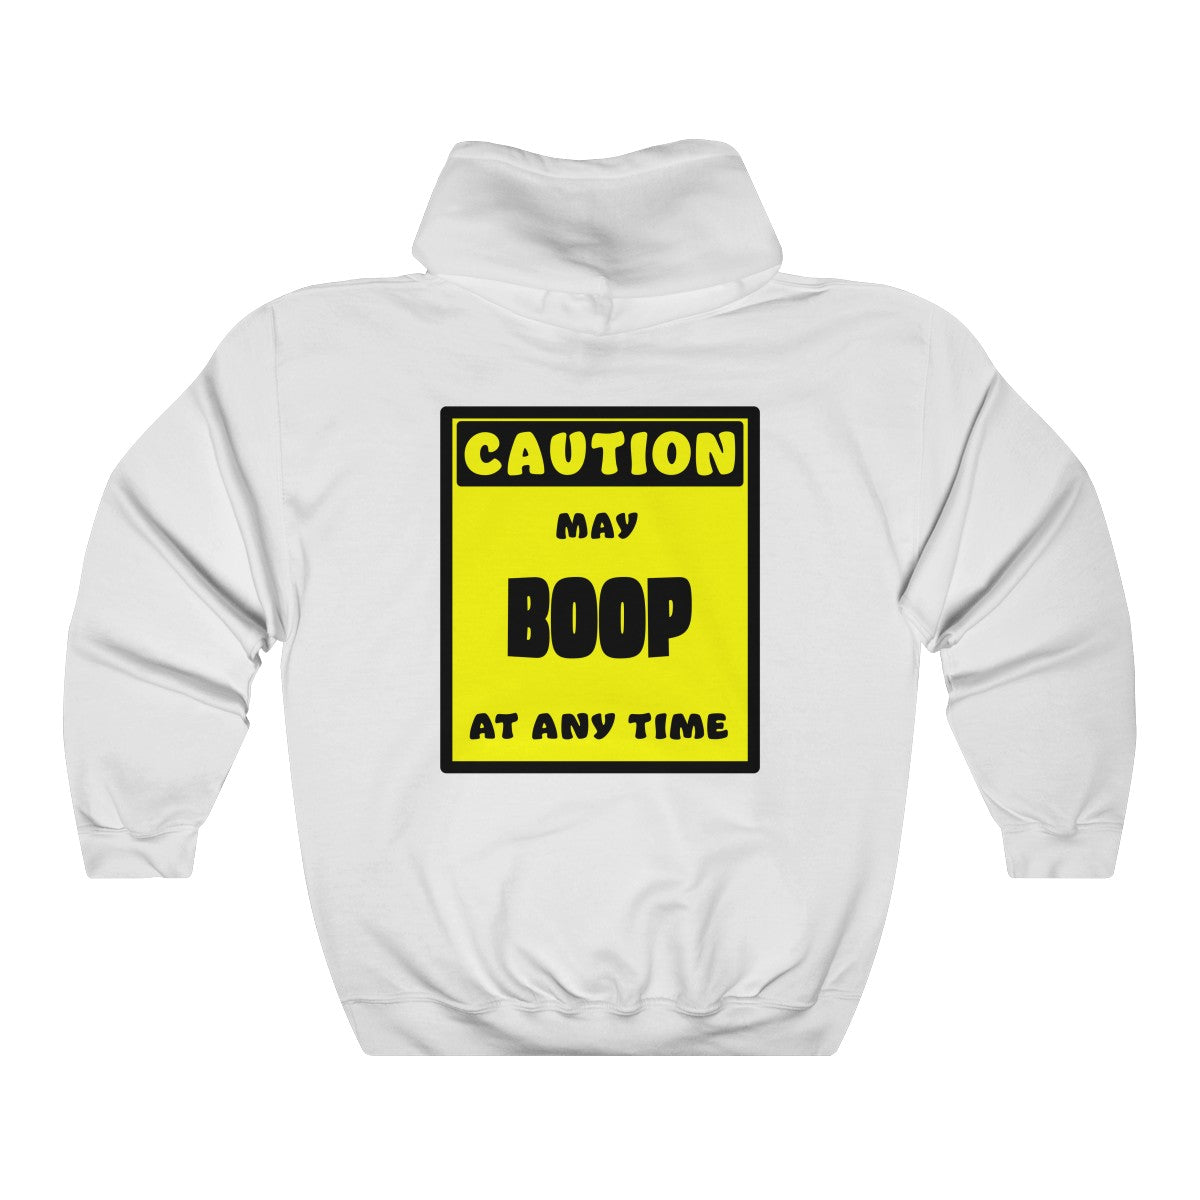 CAUTION! May BOOP at any time! - Hoodie Hoodie AFLT-Whootorca White S 